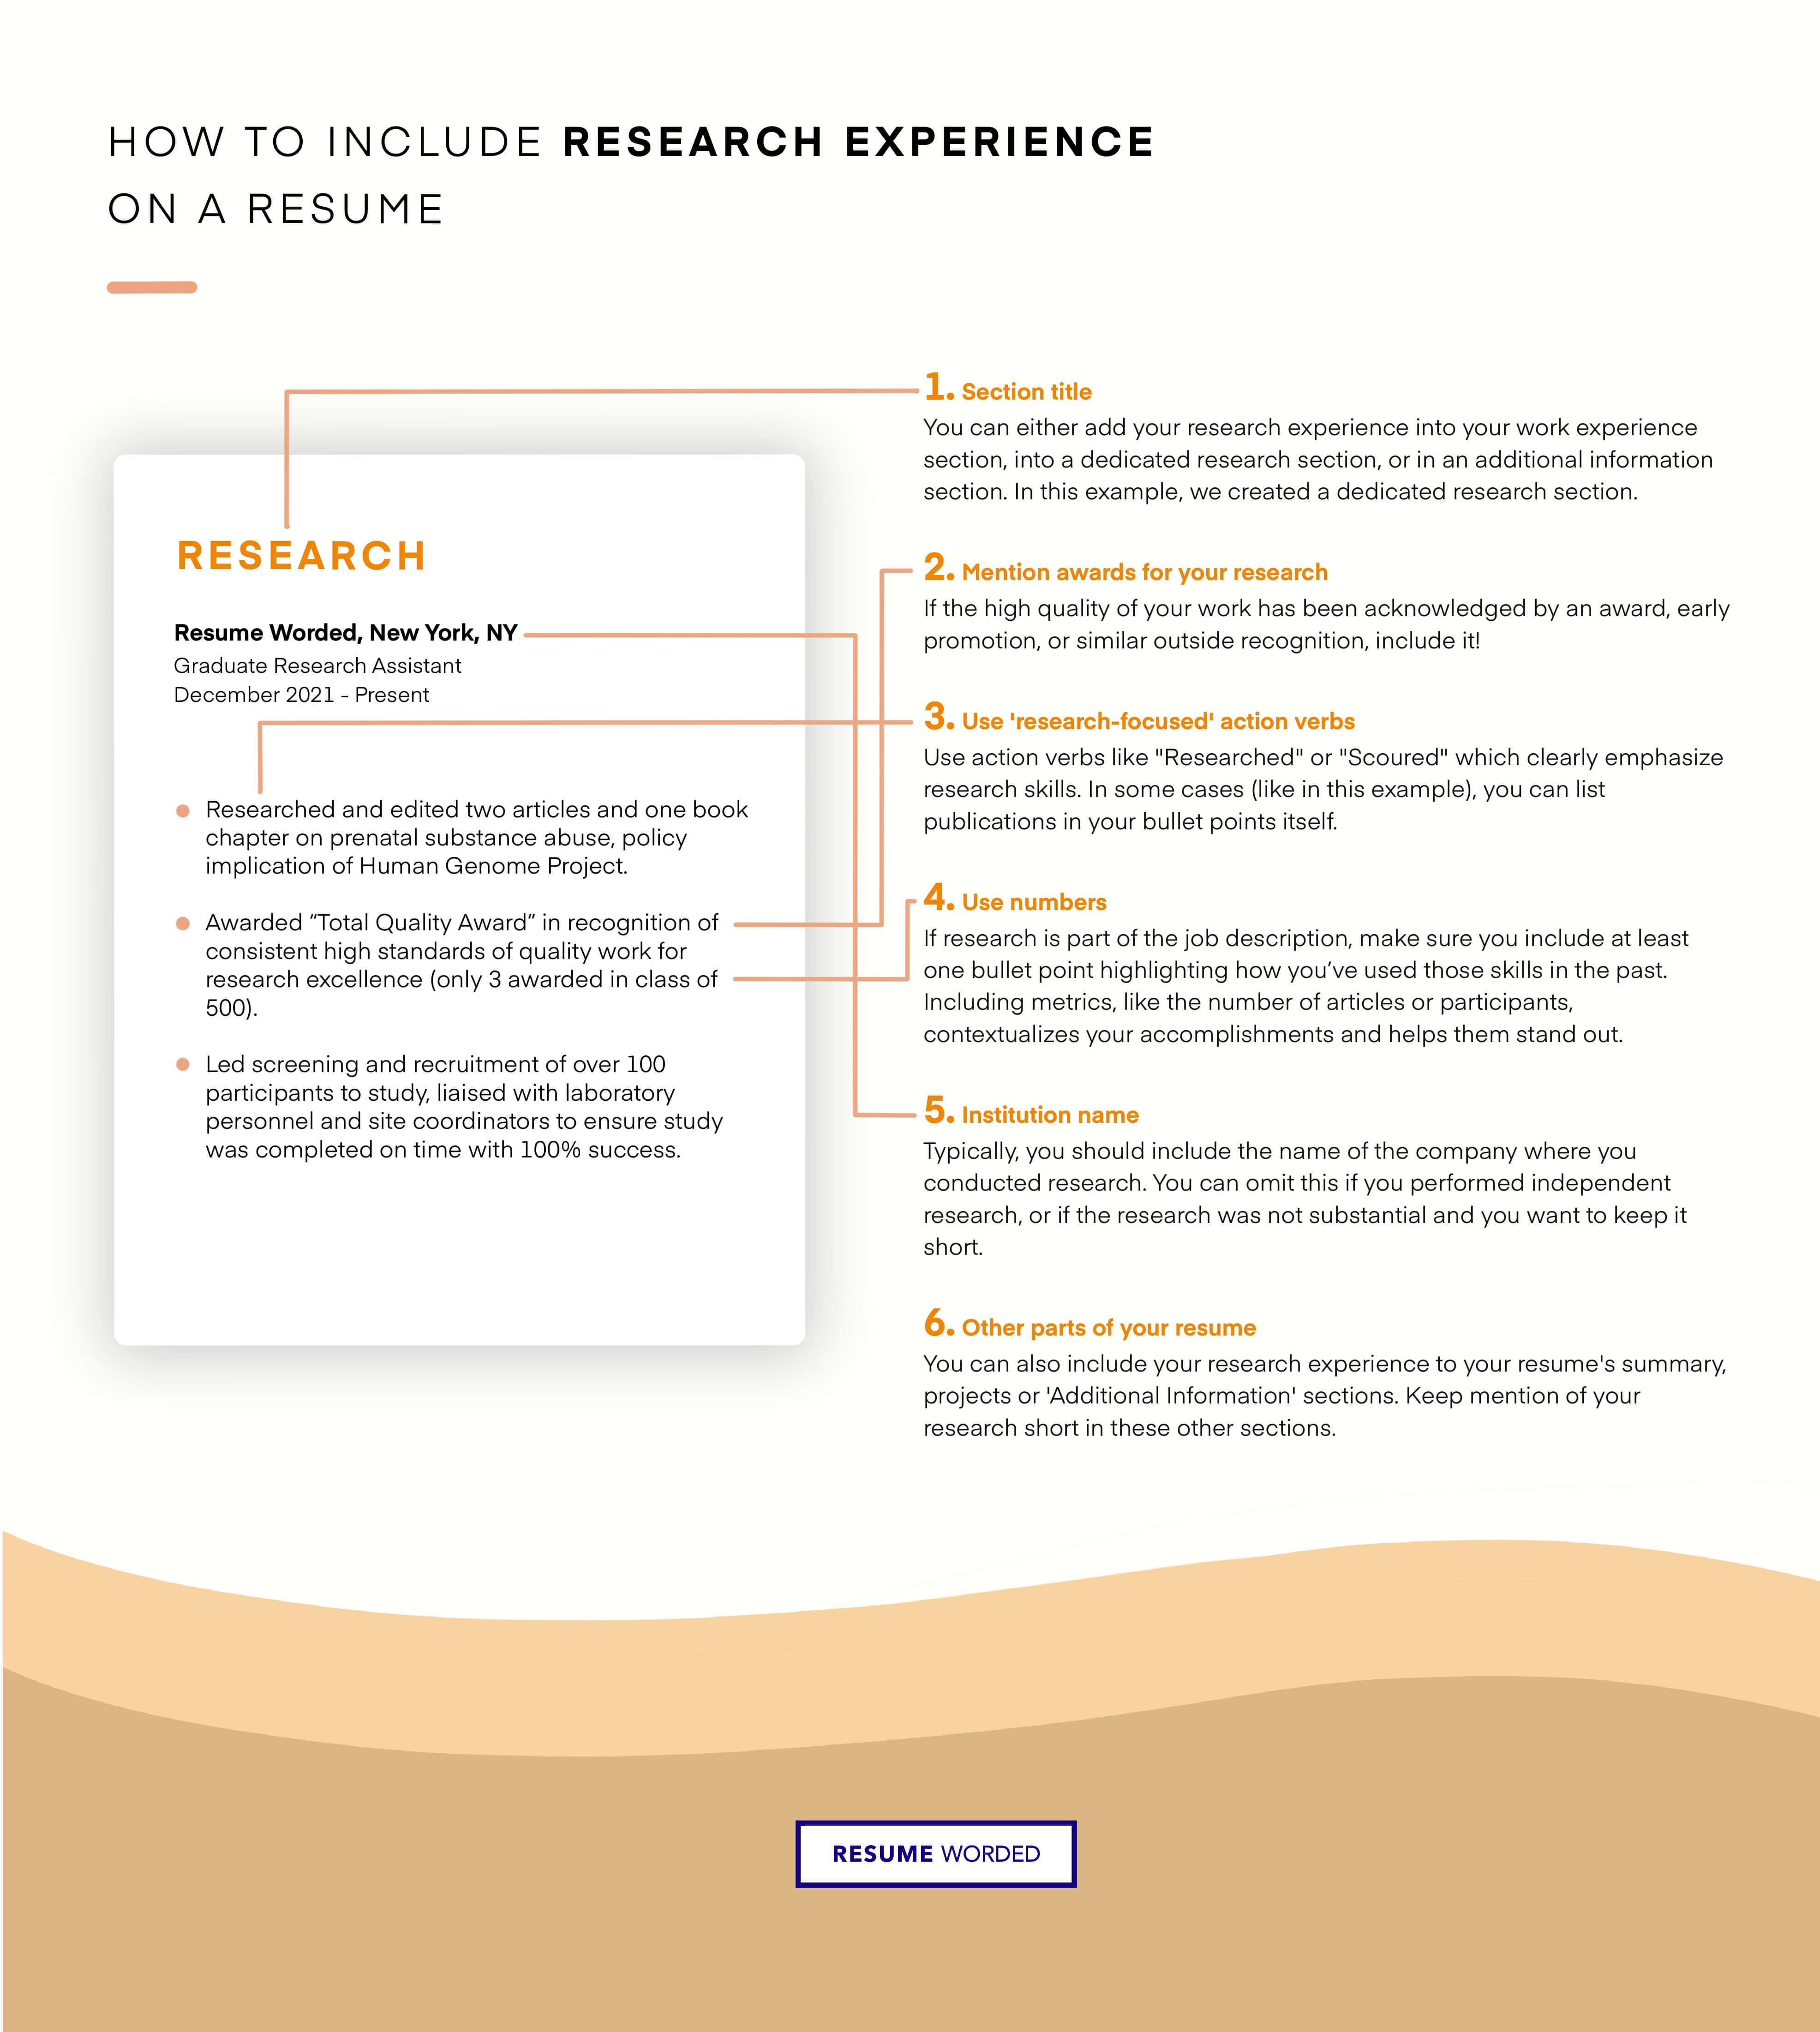 Showcase your SEO and keyword research skills - Digital Content Writer CV